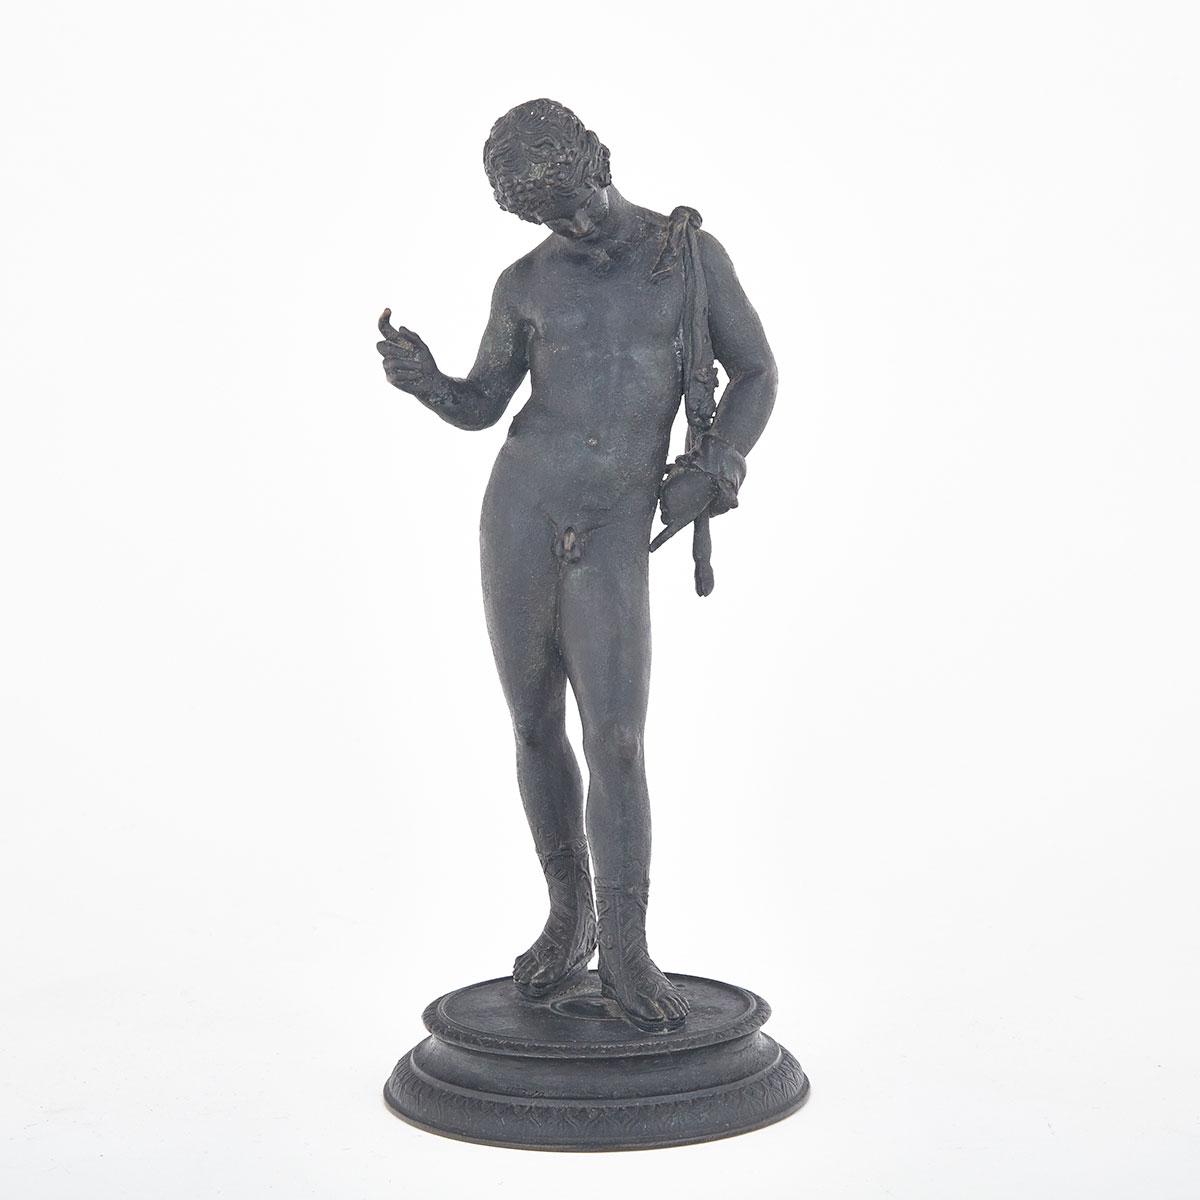 Neapolitan ‘Grand Tour’ Patinated Bronze Figure of Narcissus, After the Antique, mid 19th century